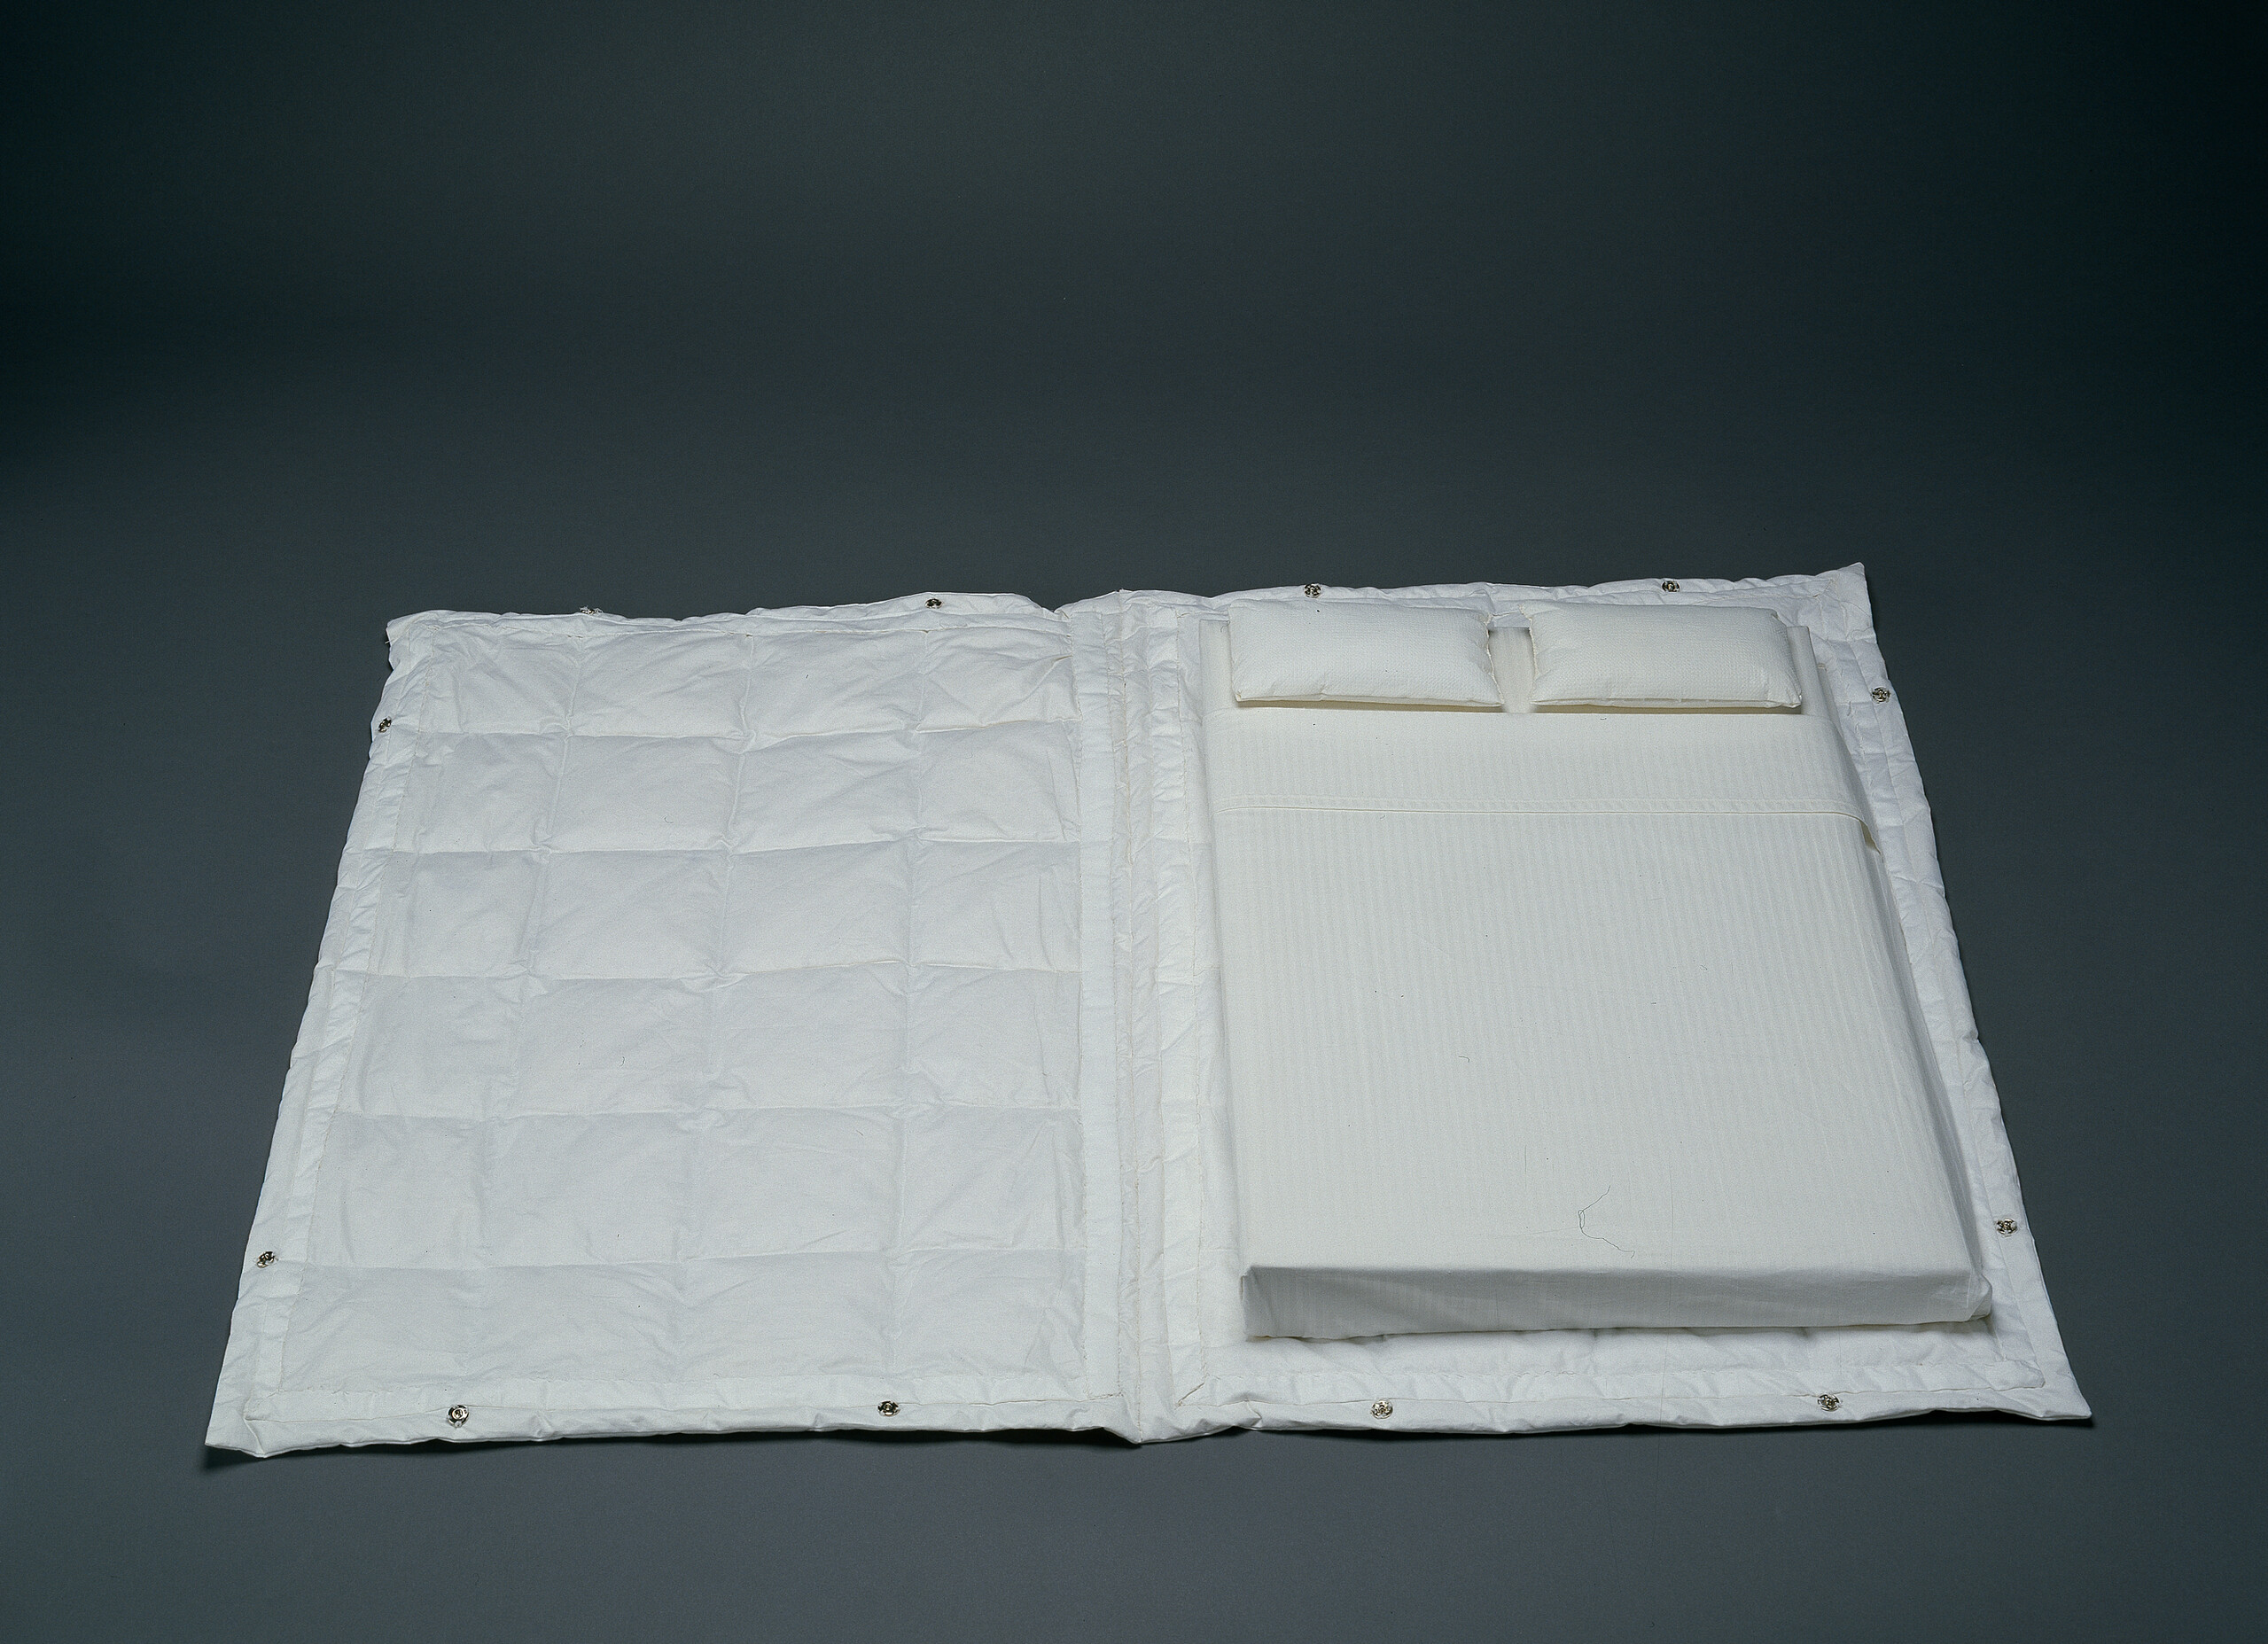 A open book with a cover made out of a white comforter and pages in the shape of a mattress covered in white sheets with two white pillows at the top.